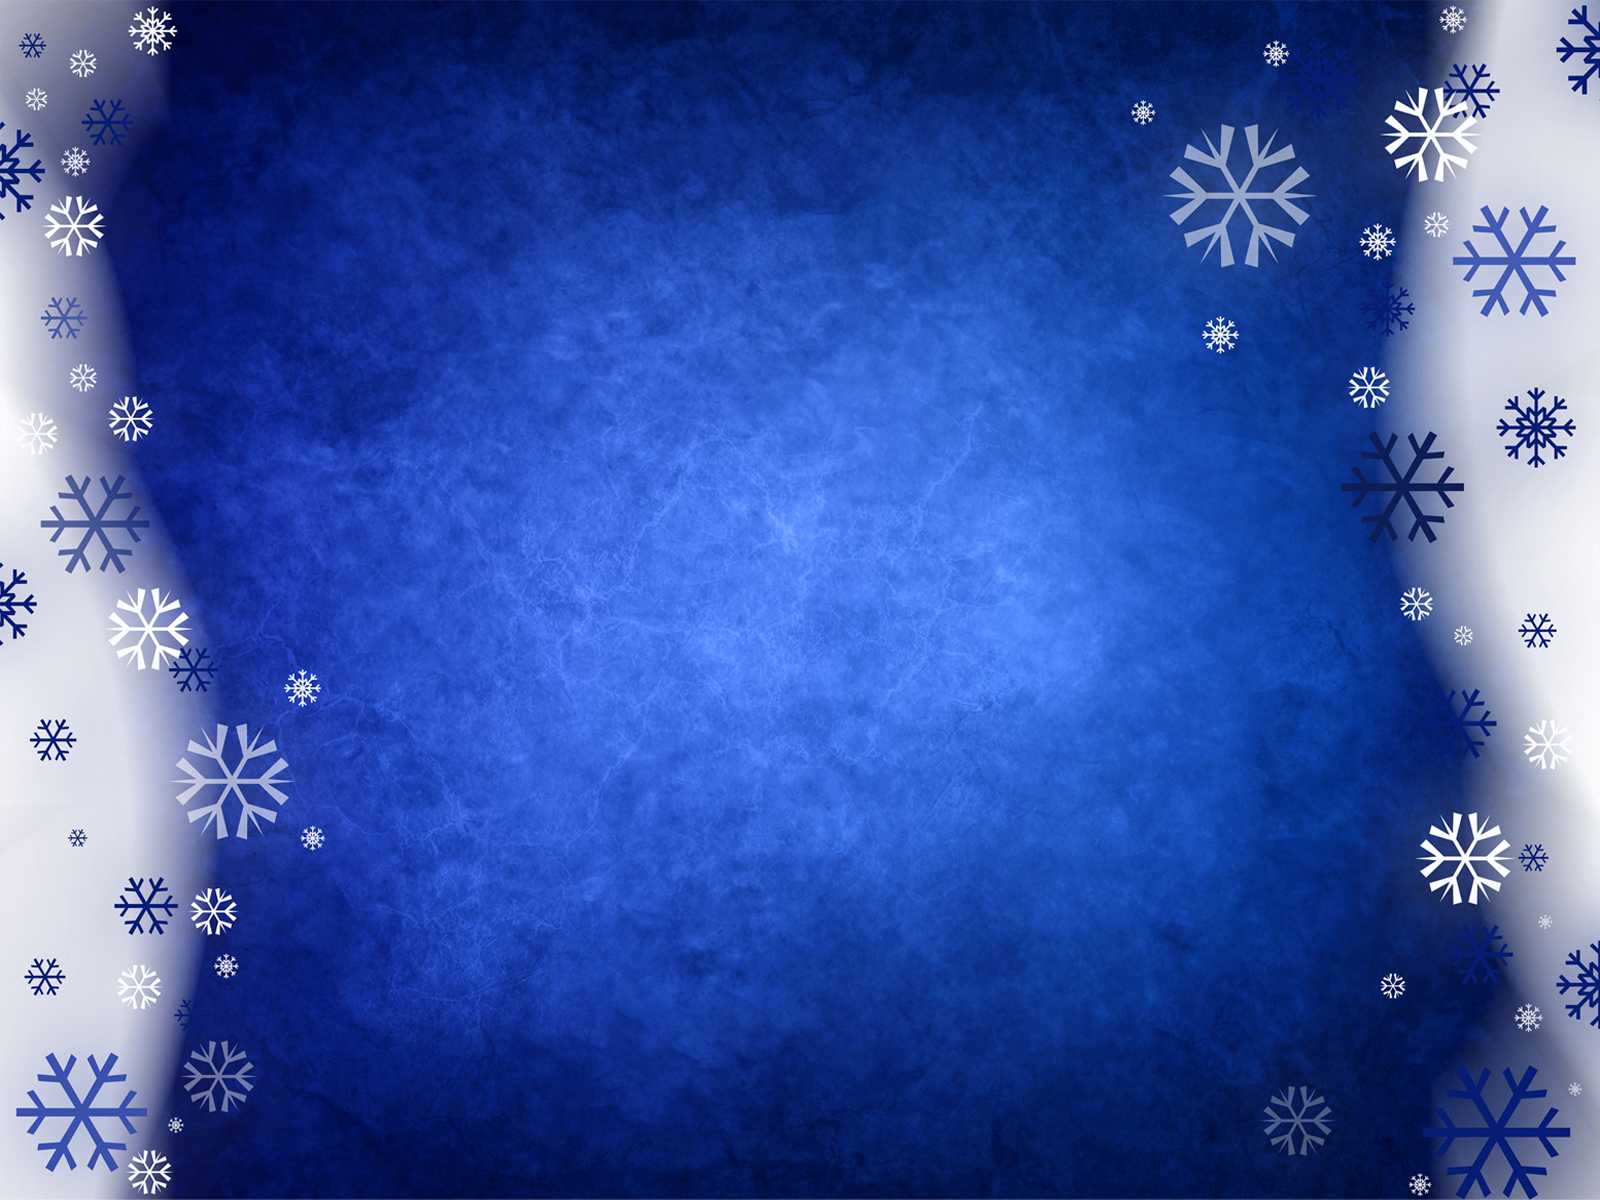 Snow Powerpoint – Free Ppt Backgrounds And Templates Inside Snow Powerpoint Template